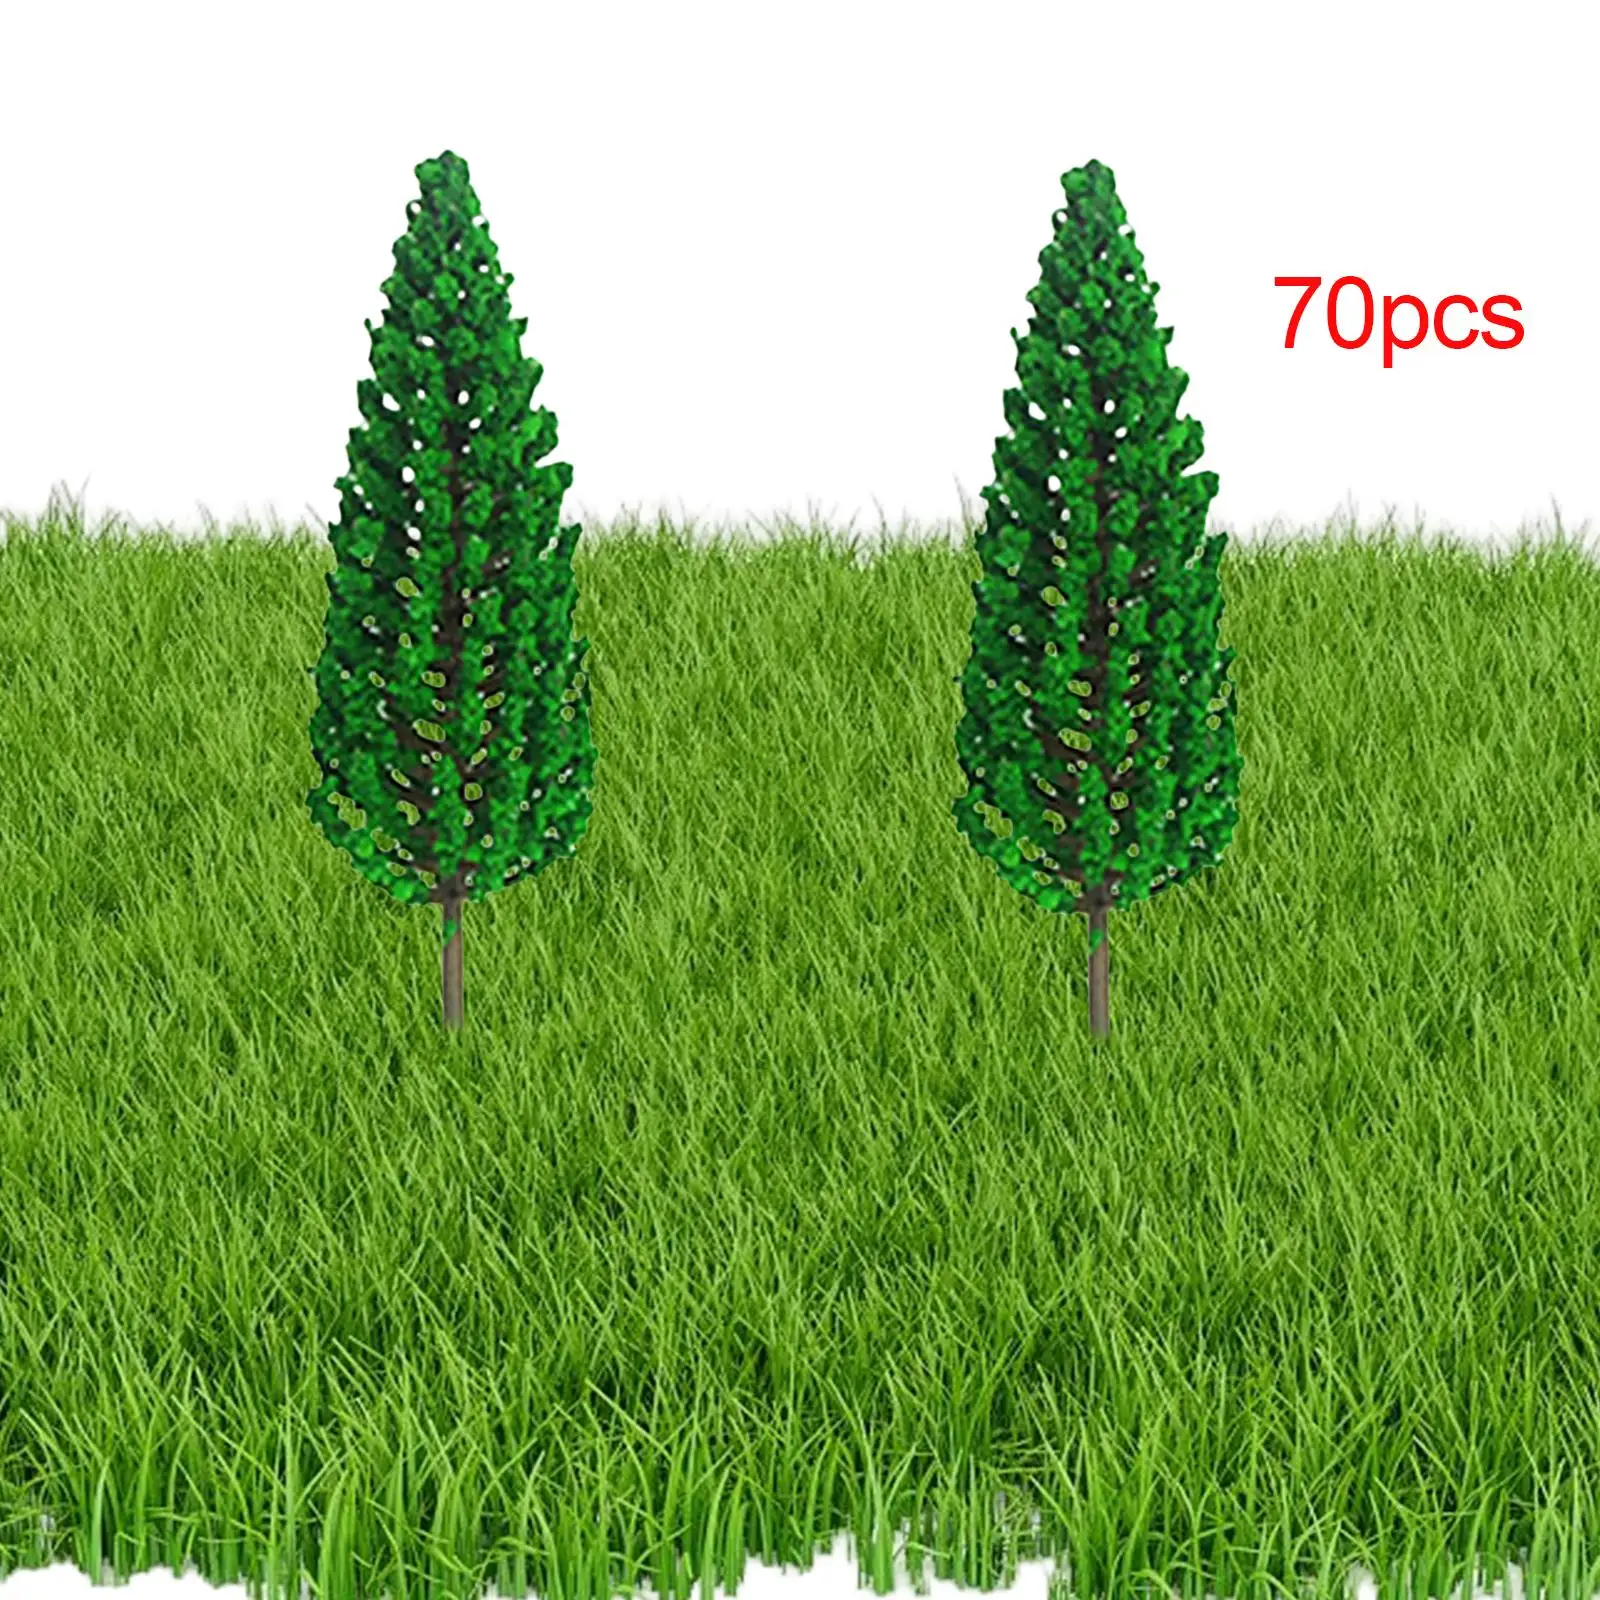 70x Miniature Landscape Trees 6cm Diorama Tree Train Scenery Architecture Trees for Building Sand Table Scenery Railroad Layout